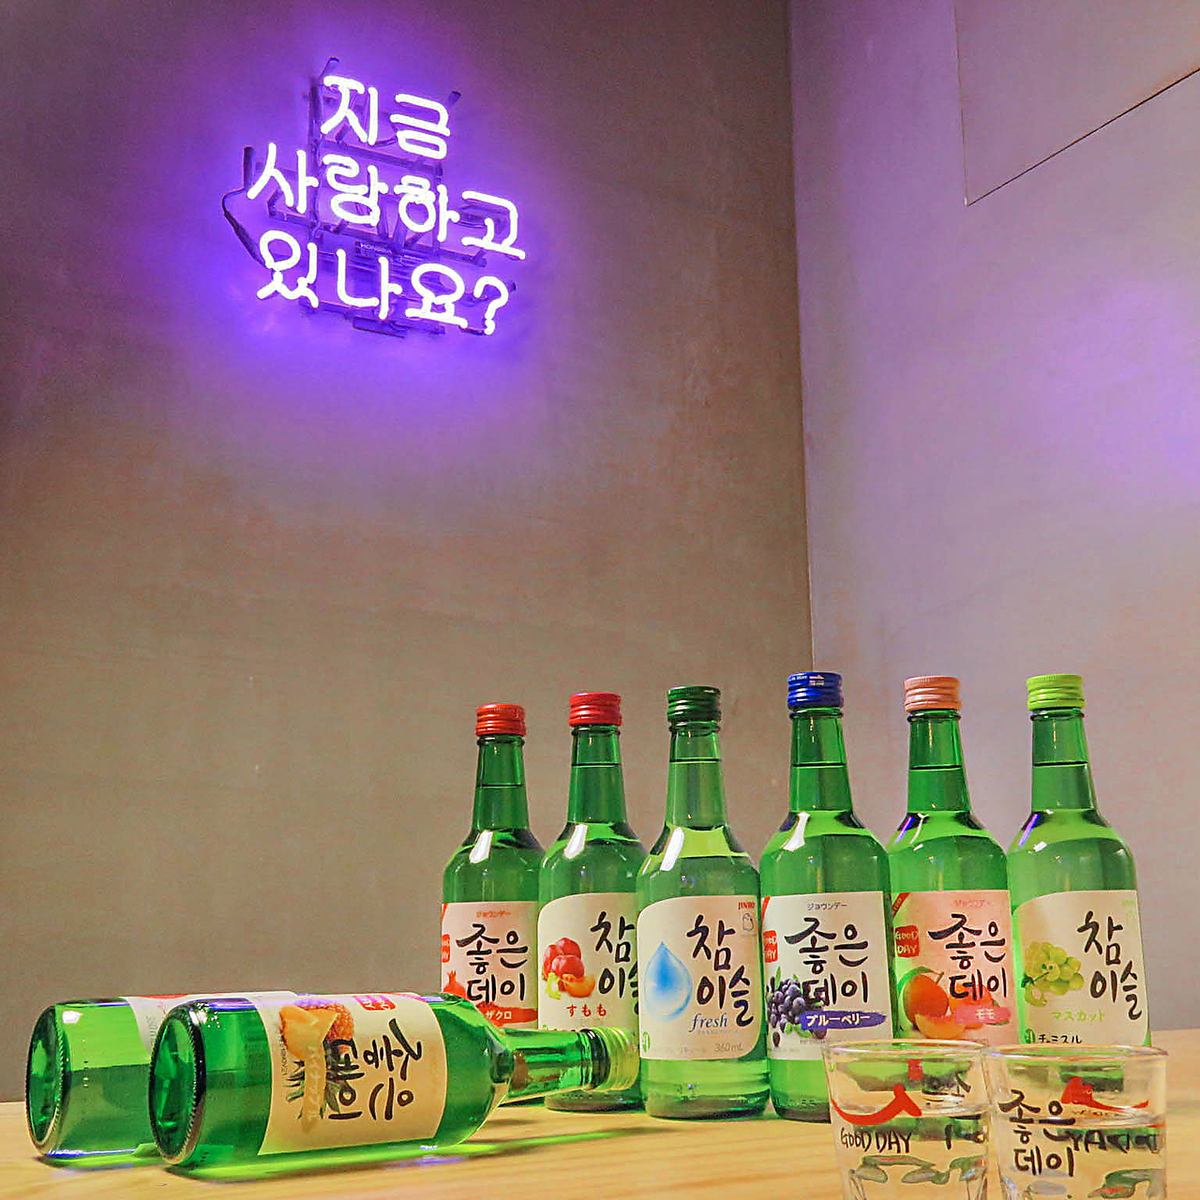 You can enjoy a variety of alcoholic drinks with Korean gourmet food.